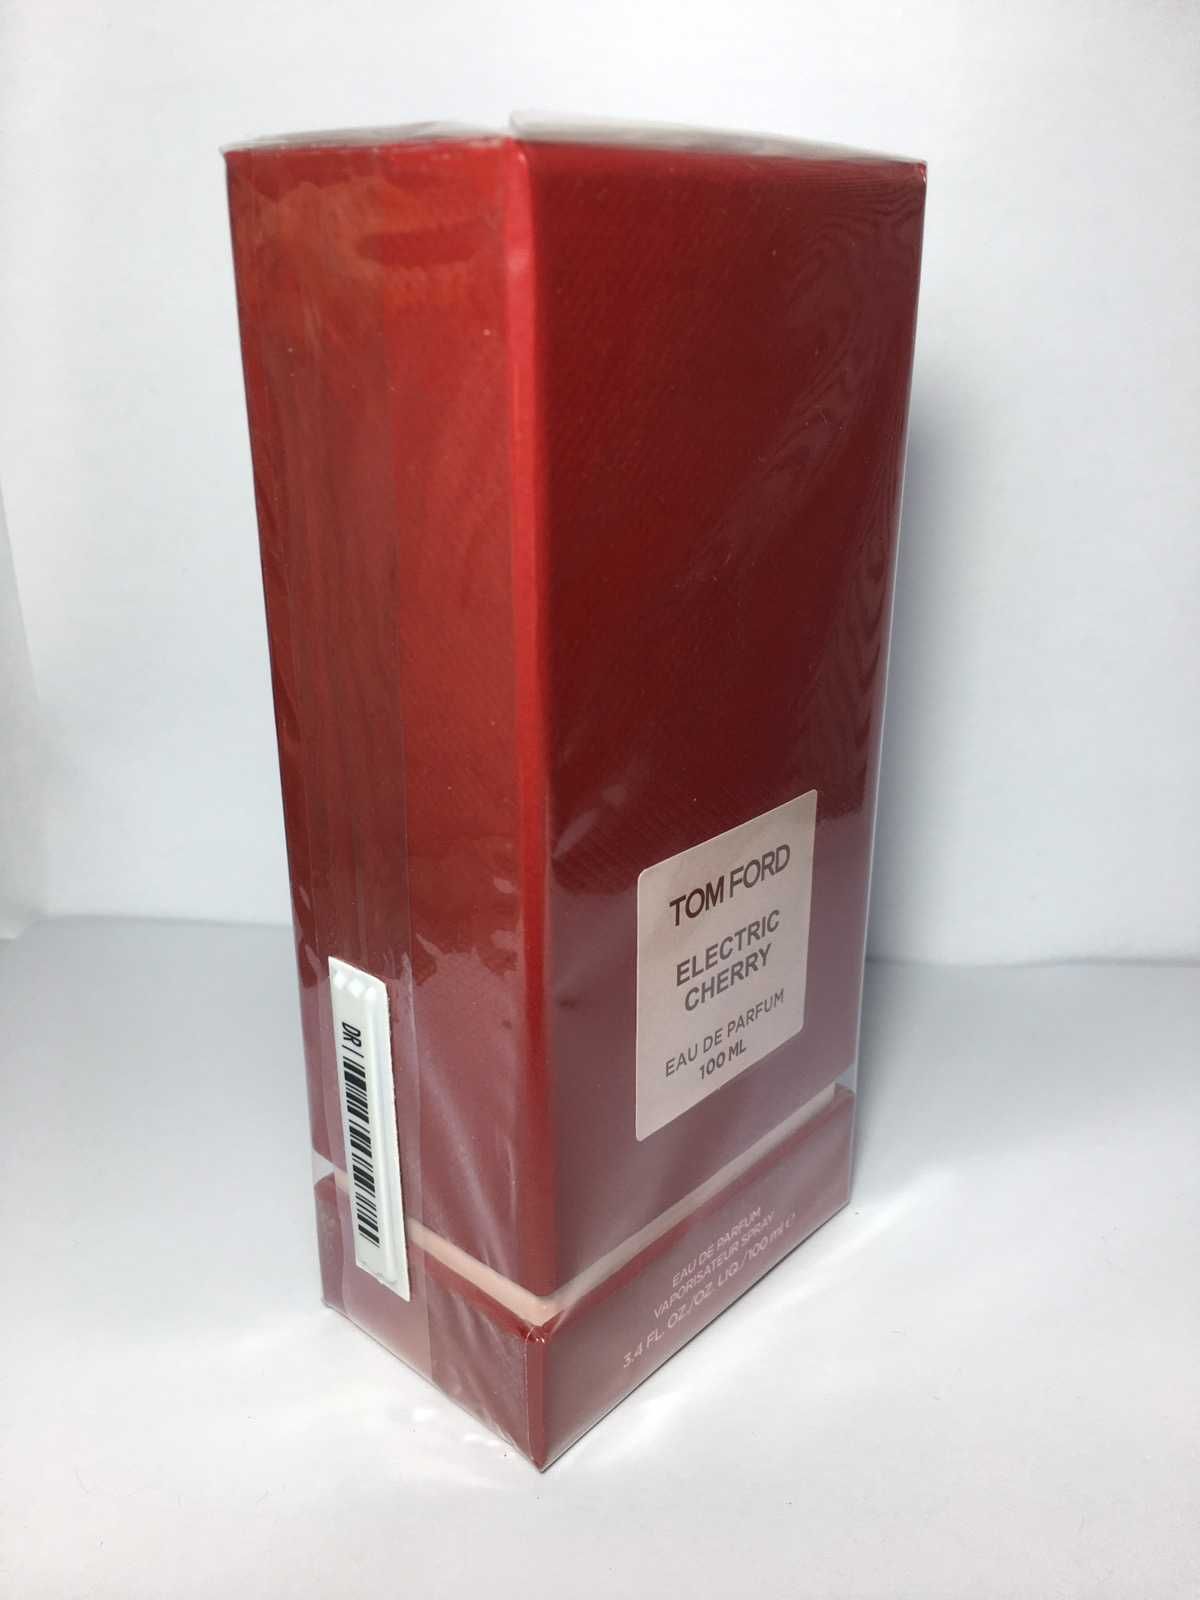 Tom Ford Electric Cherry LUX 100 ml